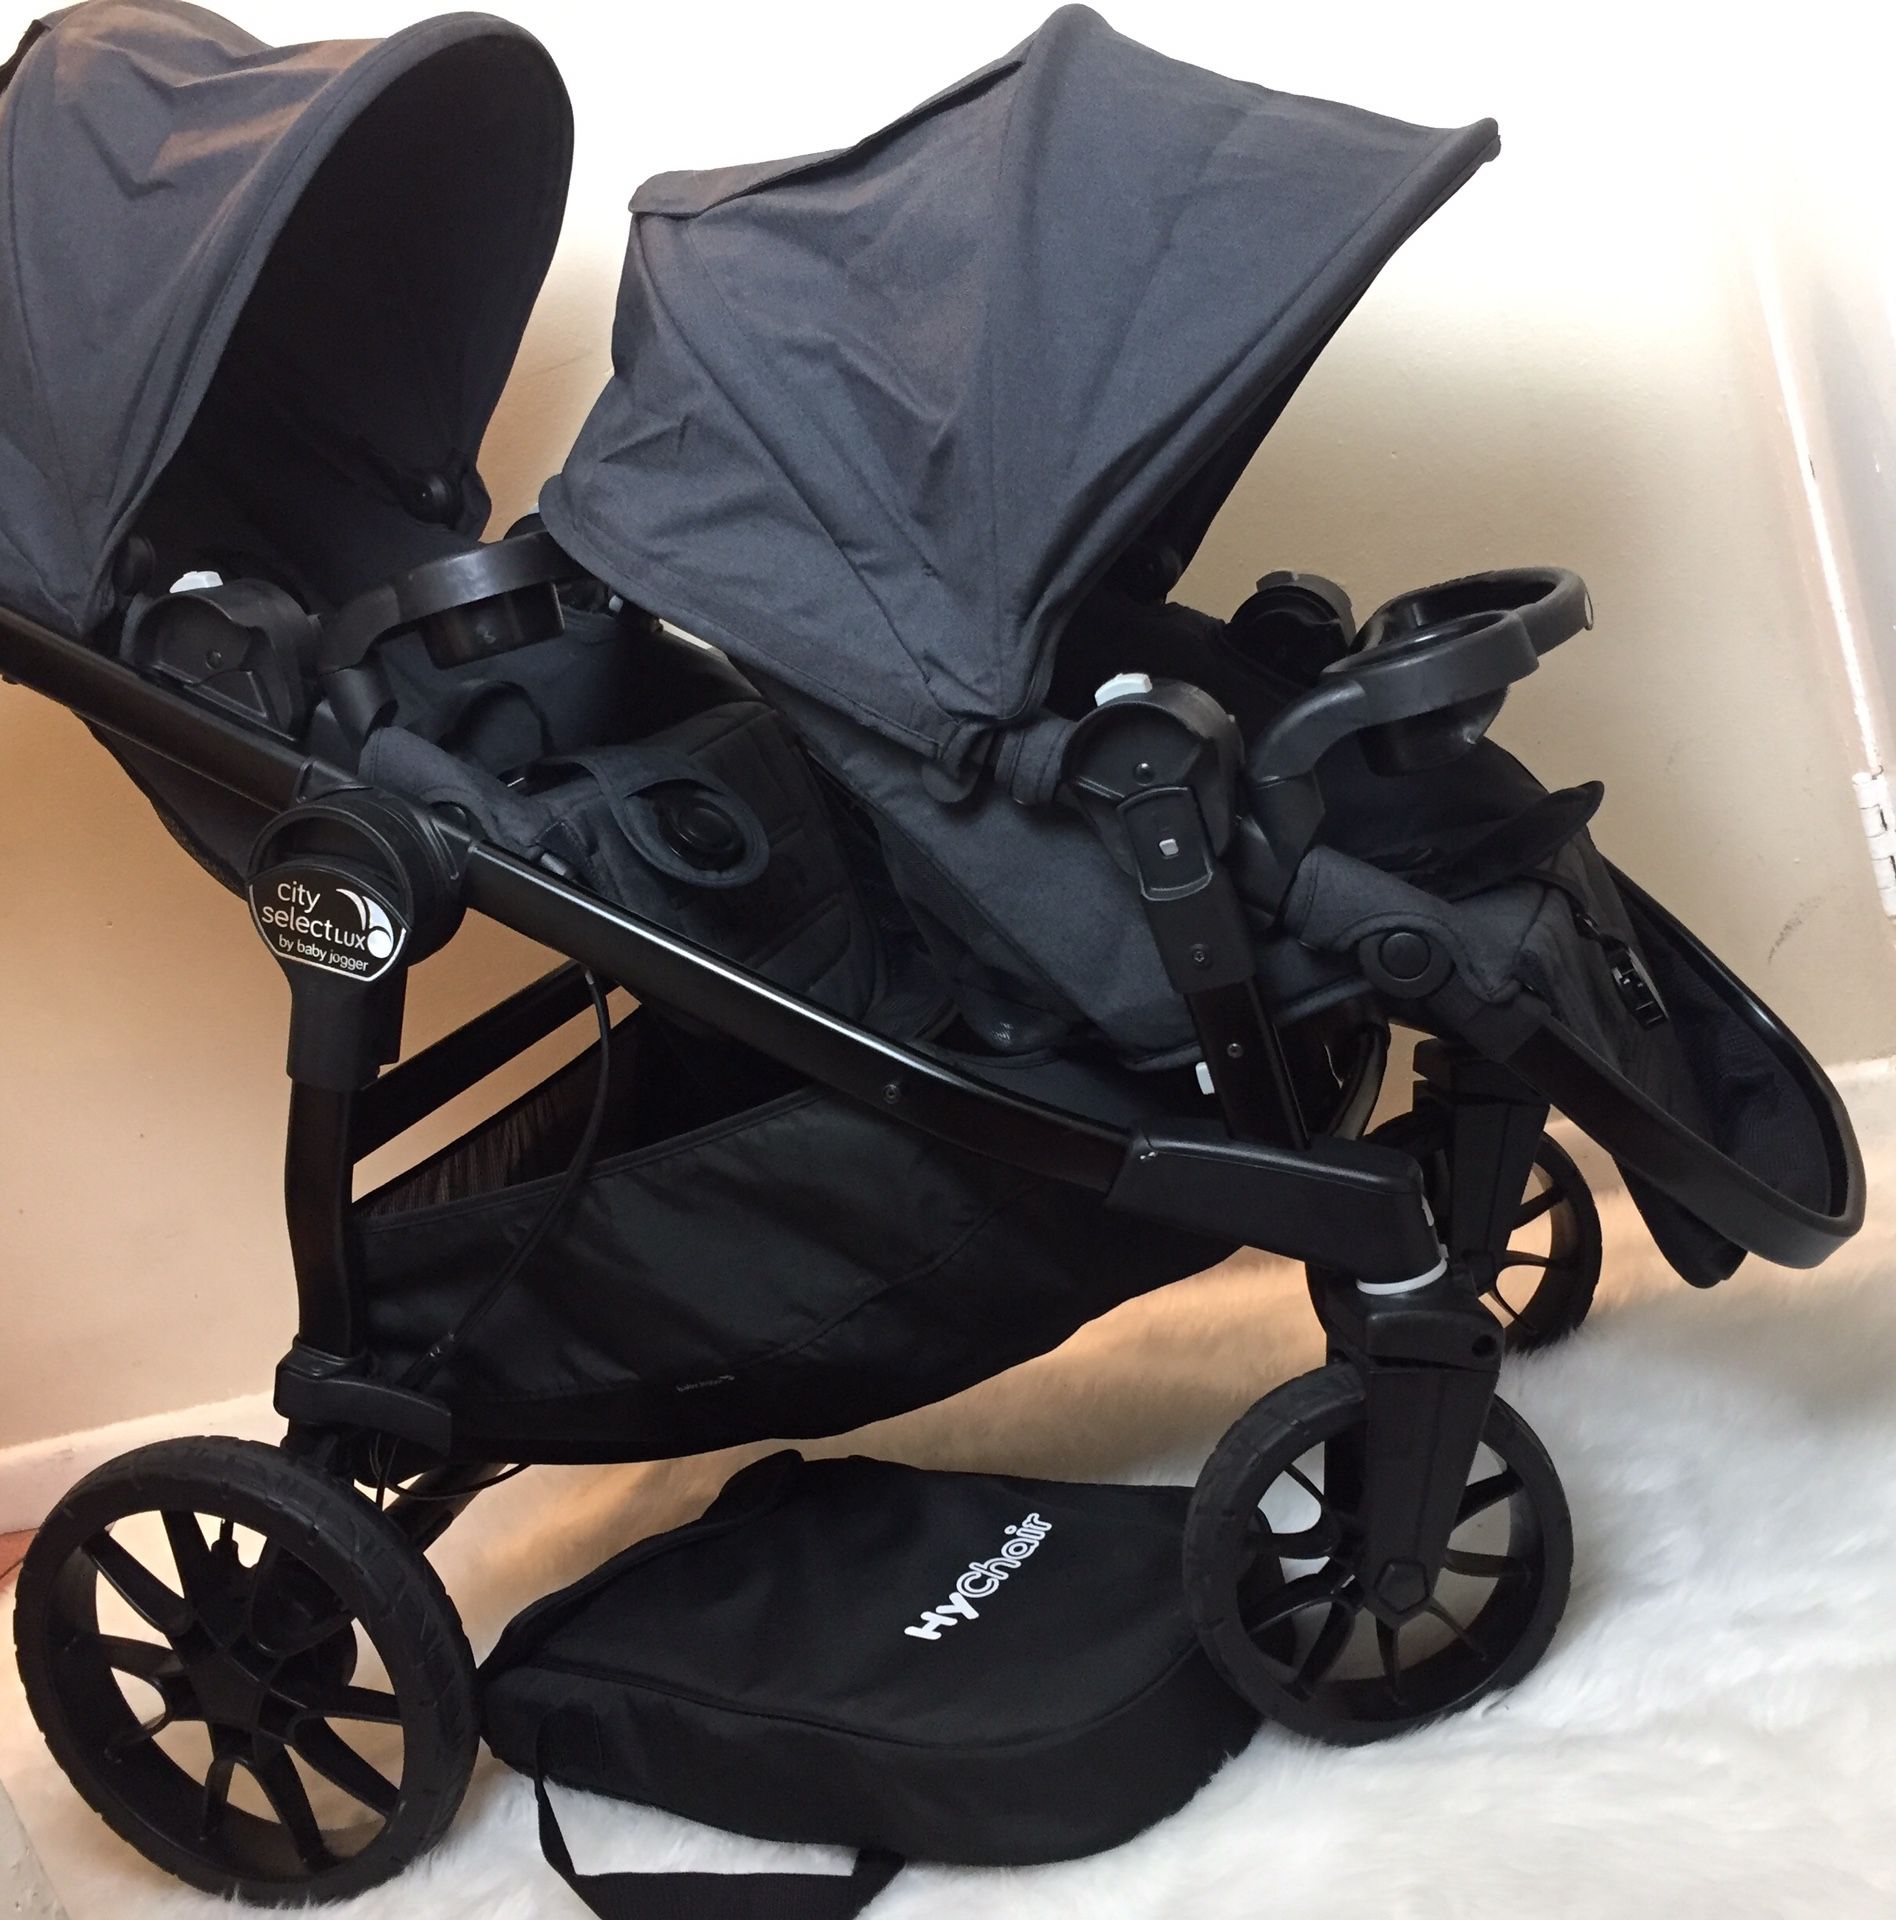 City select lux stroller no extras